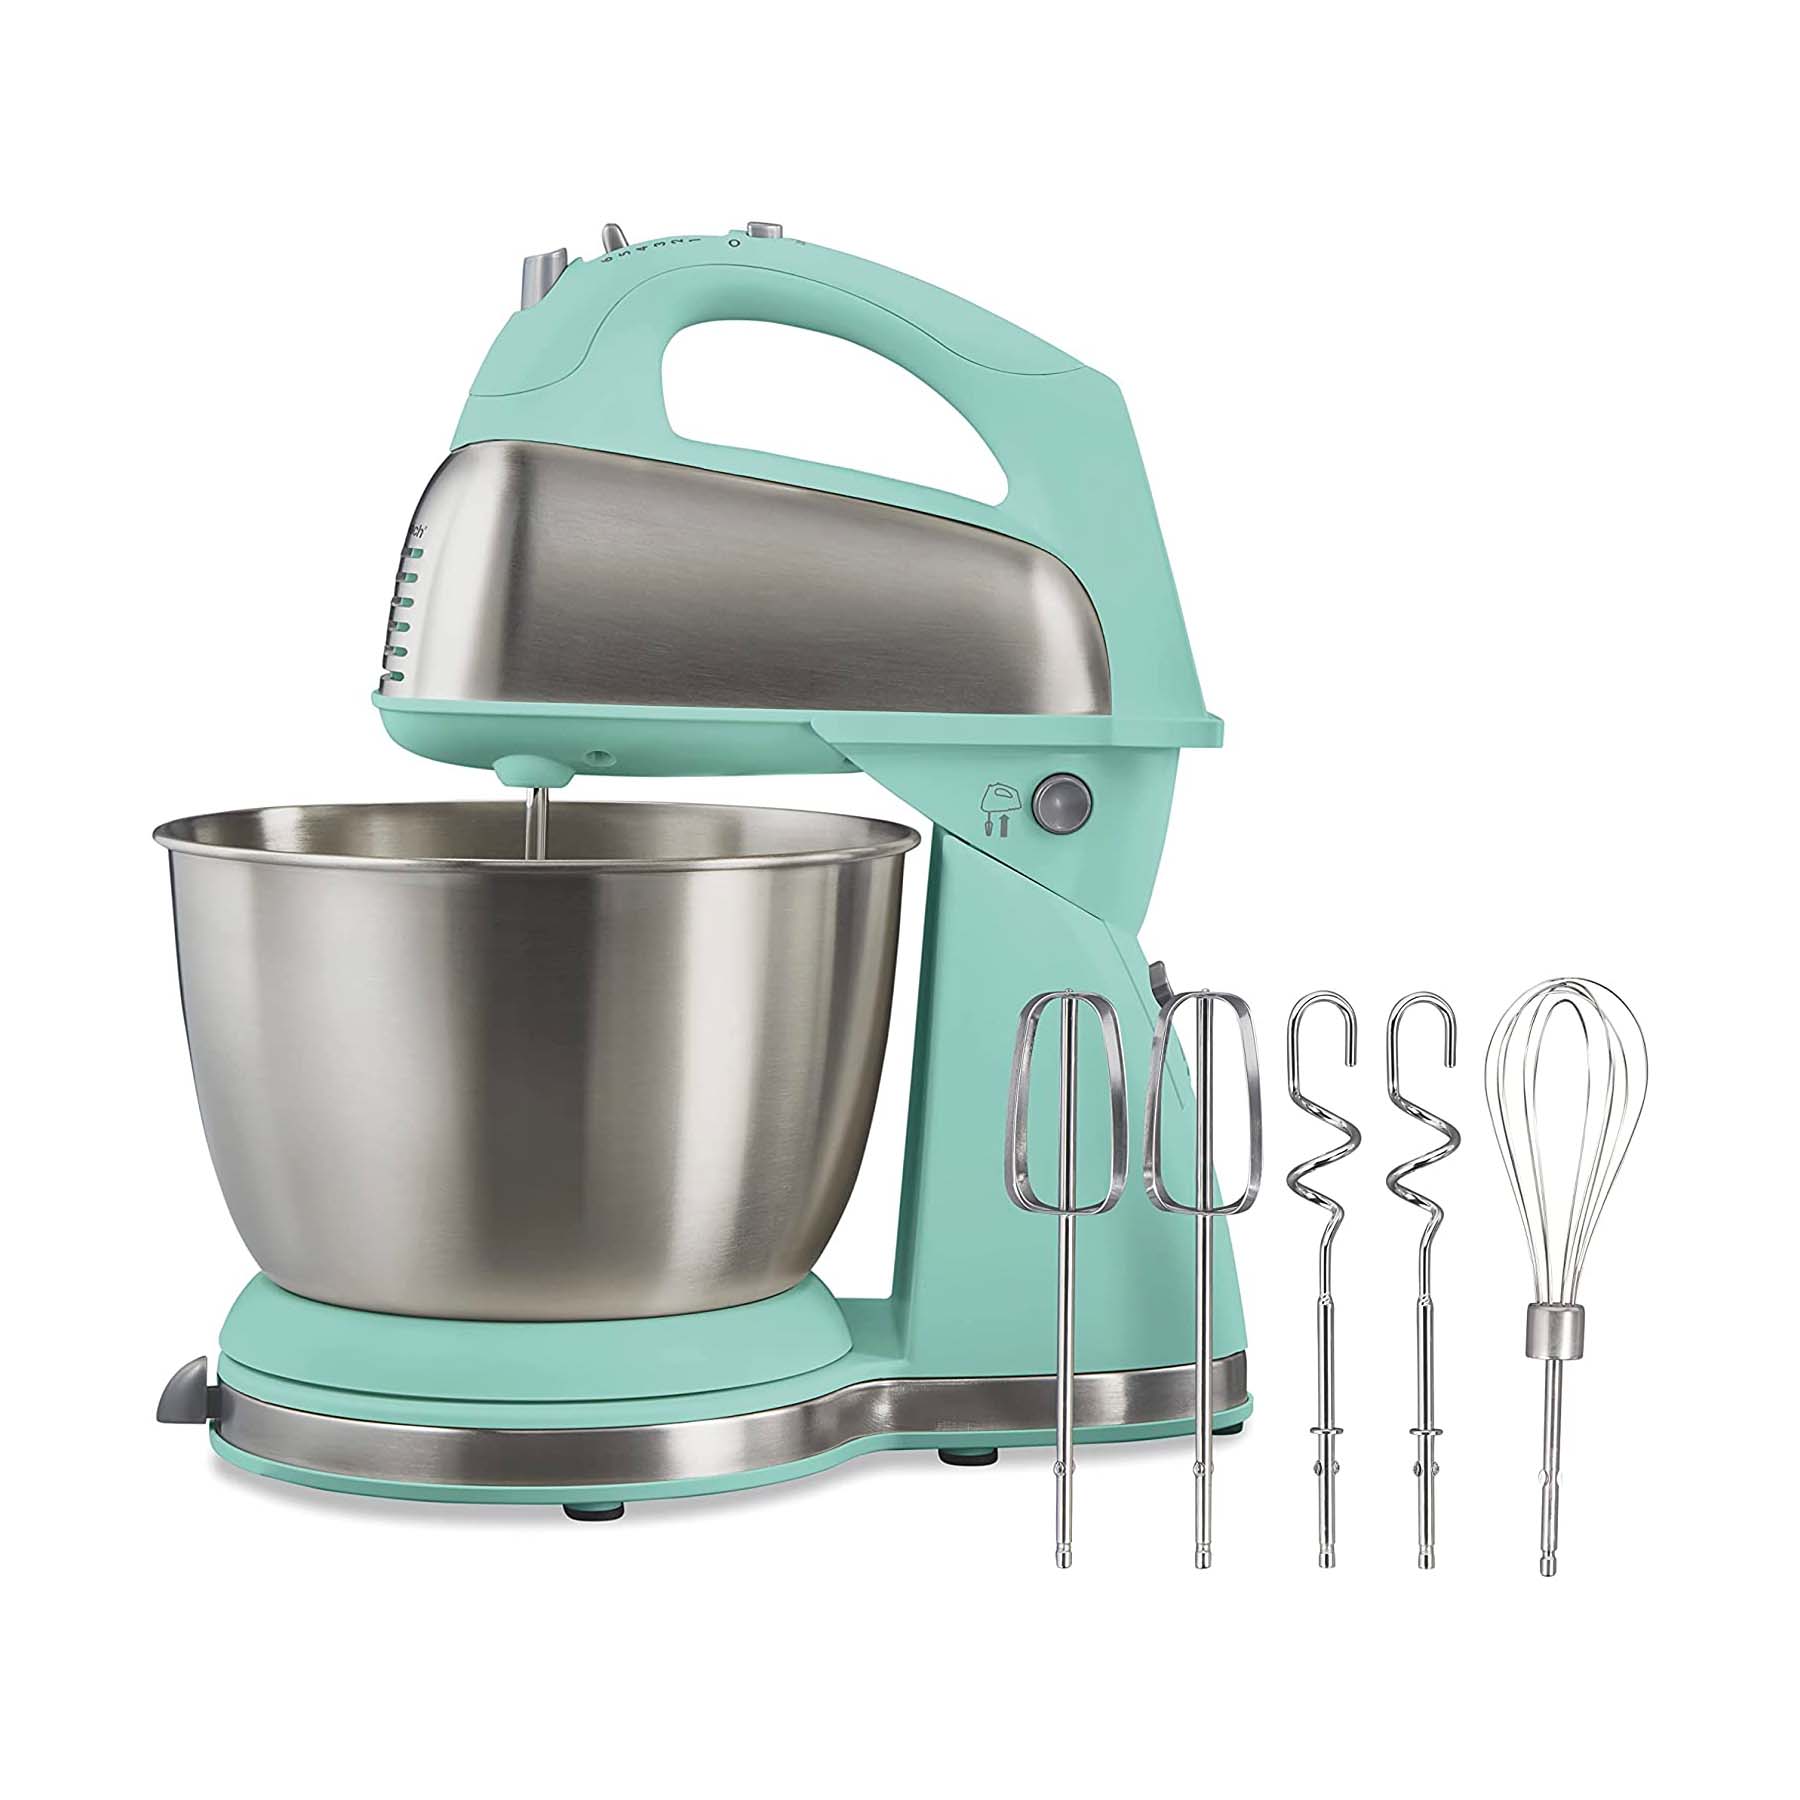 https://video-images.vice.com//products/6408f1f473caf8d34ad57c90/gallery-image/1678307829313-best-stand-mixers-hamilton-beach-classic-stand-hand-mixer.jpeg?crop=0.75xw:1xh;center,center